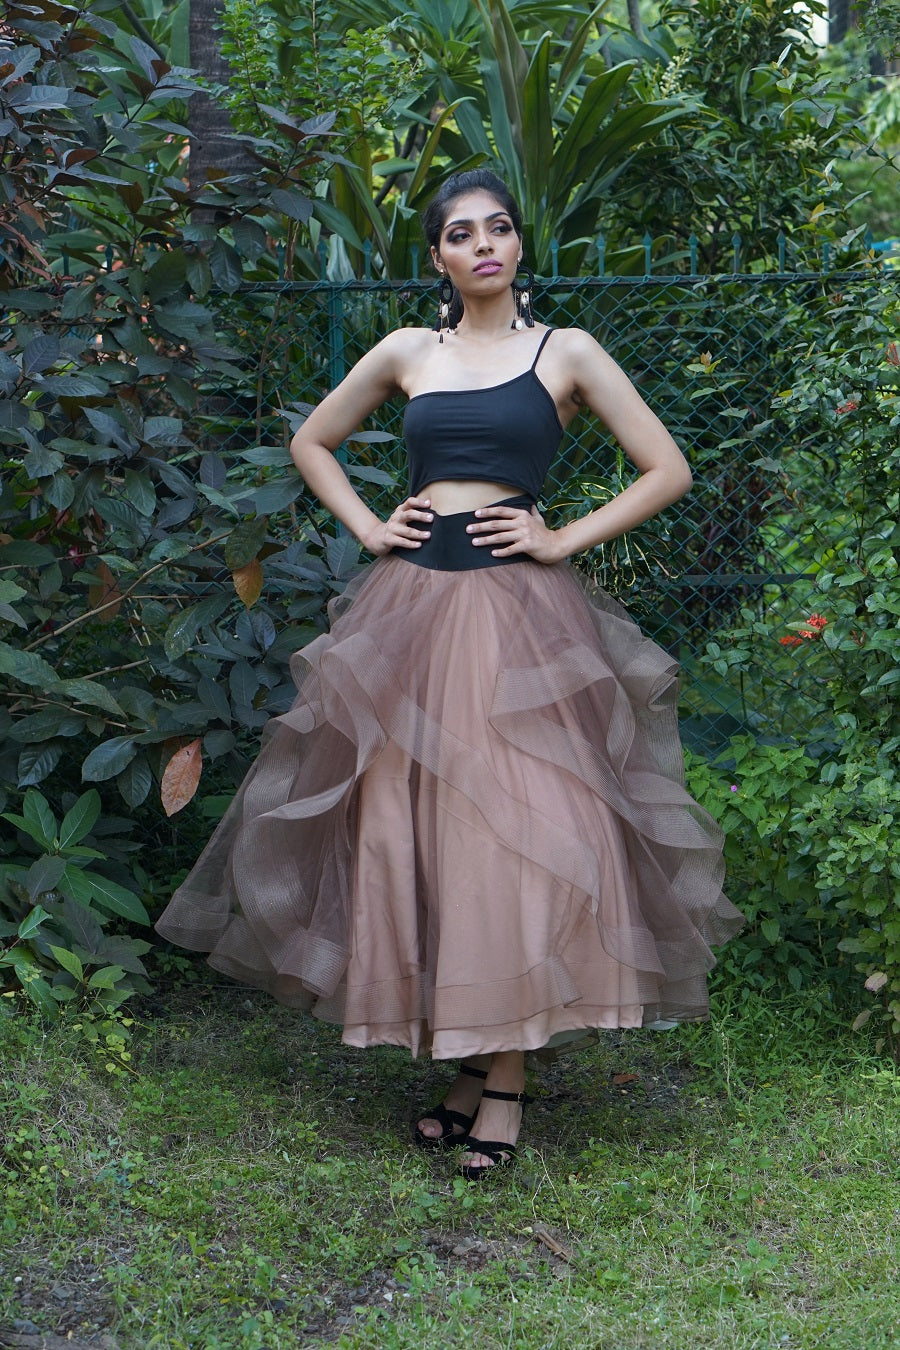 TCR Brown Tulle Layered Skirt With Black Bodysuit!